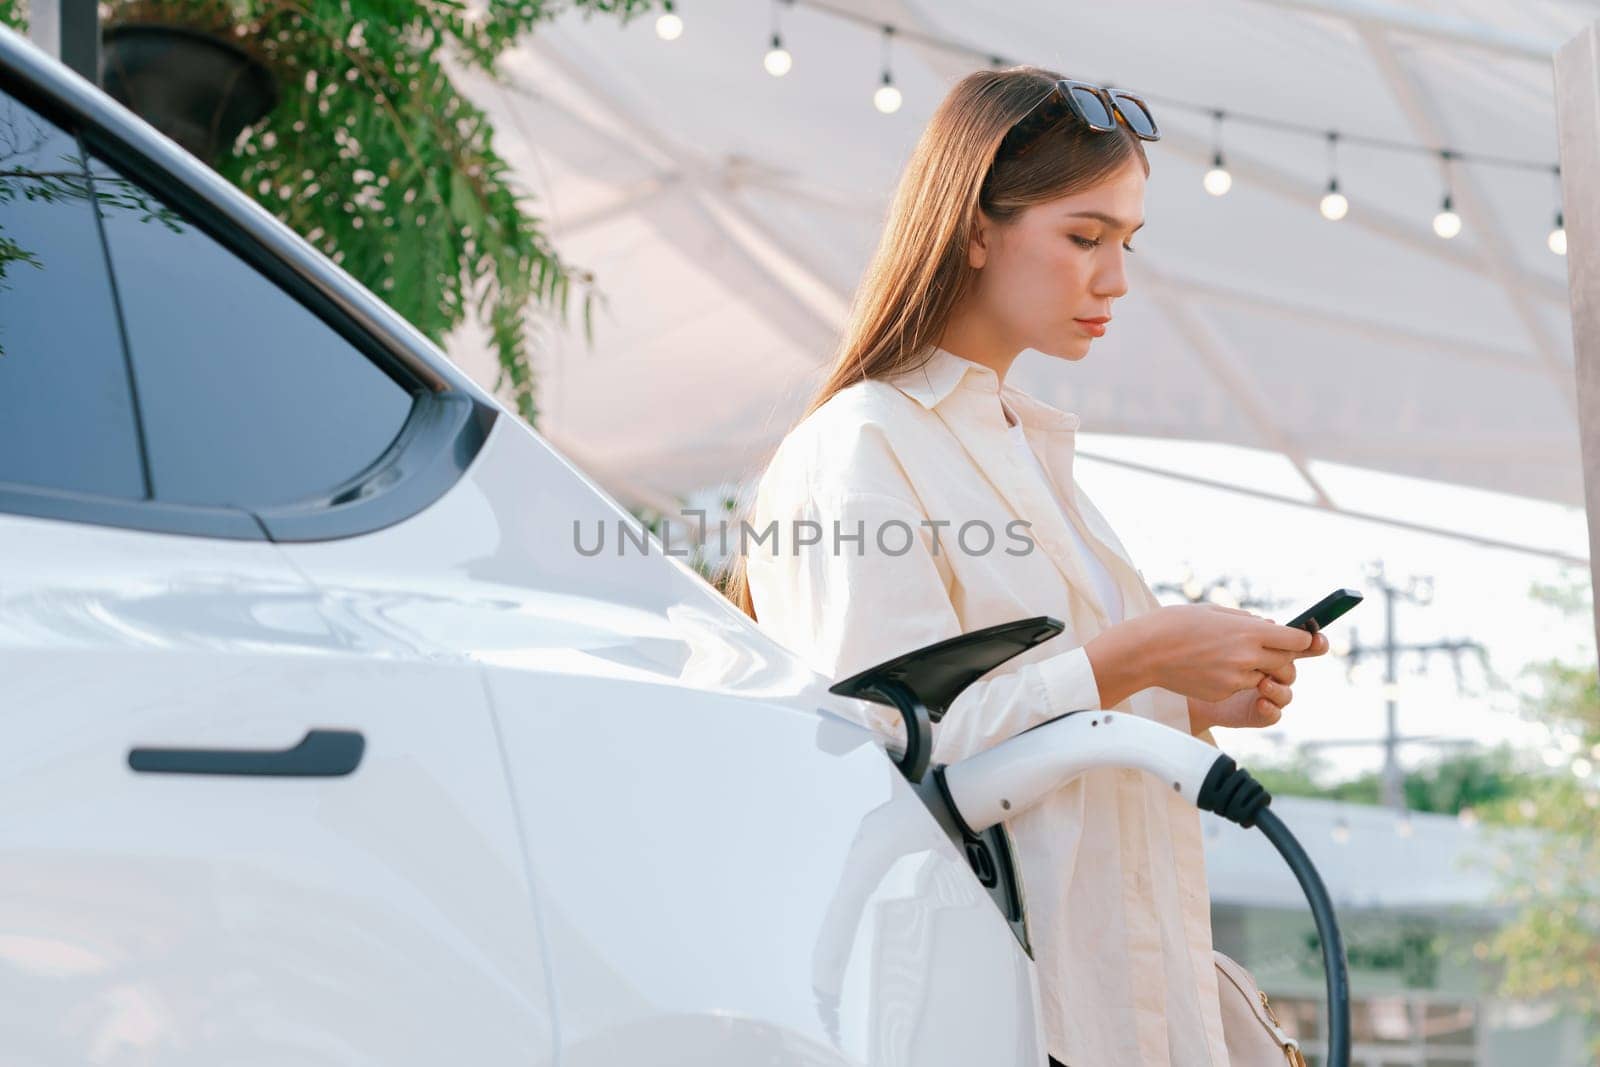 Sustainable urban commute with young woman pay electricity for EV electric car recharging at outdoor cafe in springtime garden, green city sustainability and environmental friendly EV car. Expedient